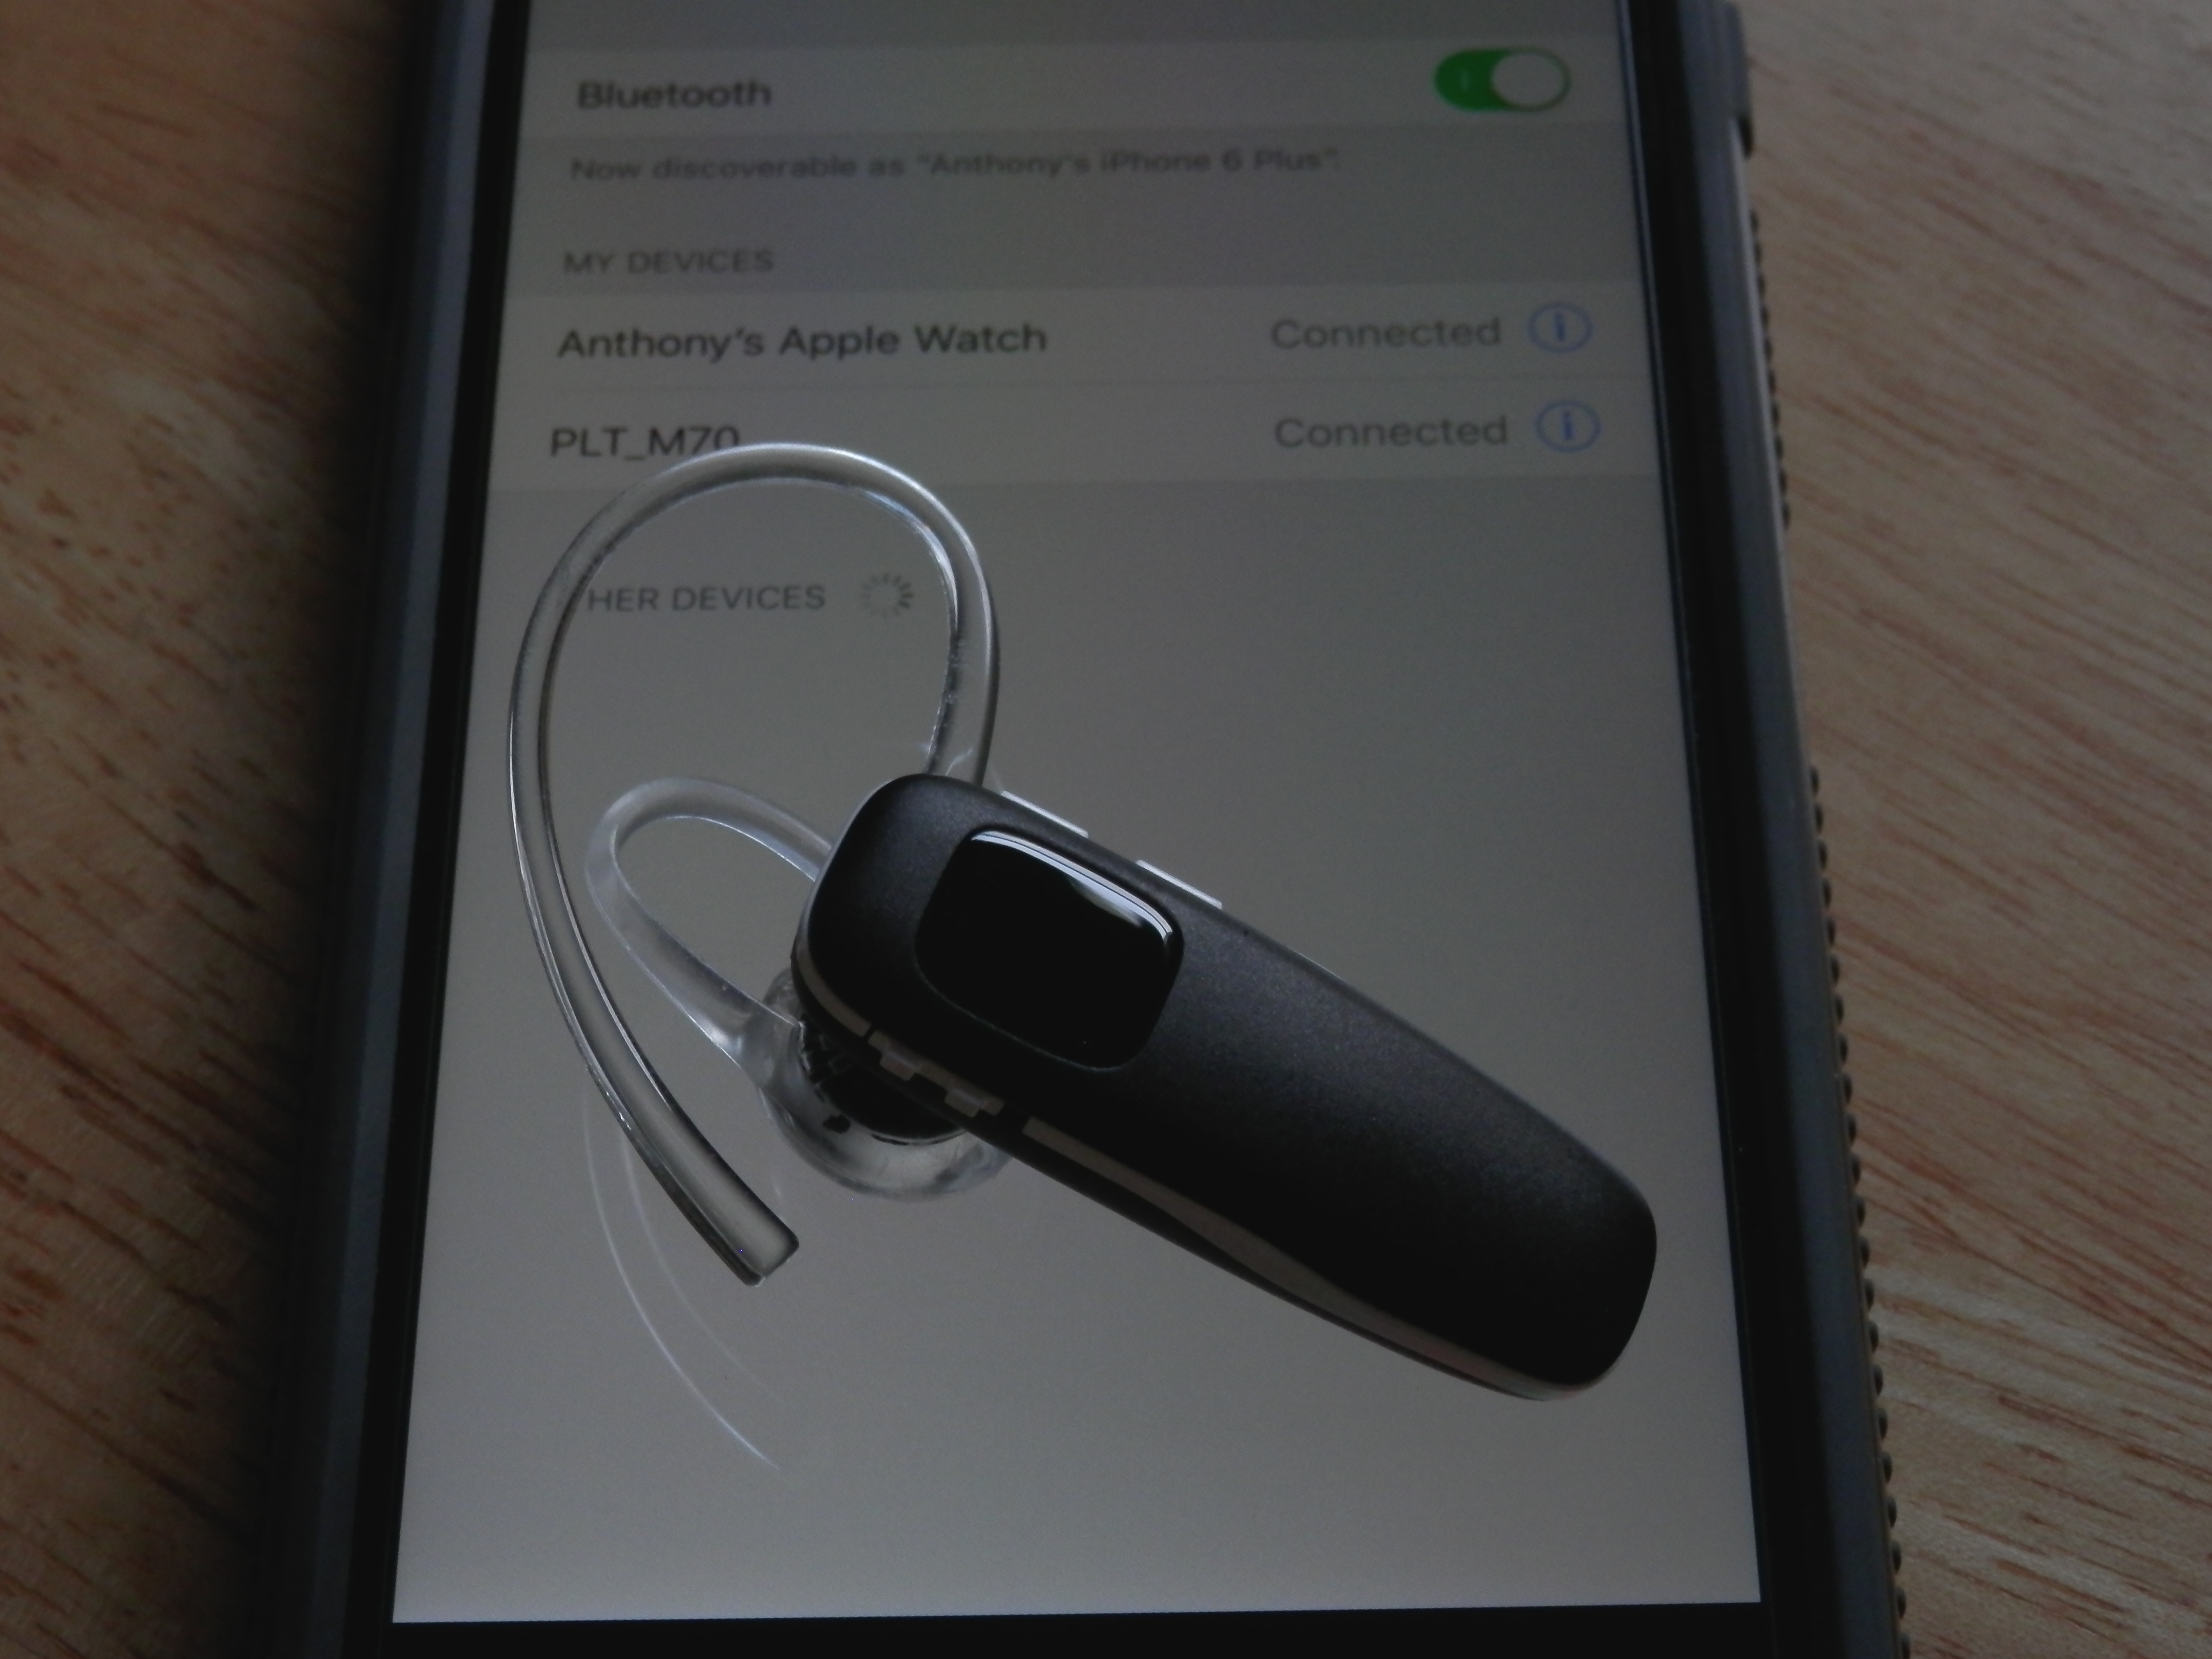 top 5 iphone accessories plantronics m70 blueooth headset